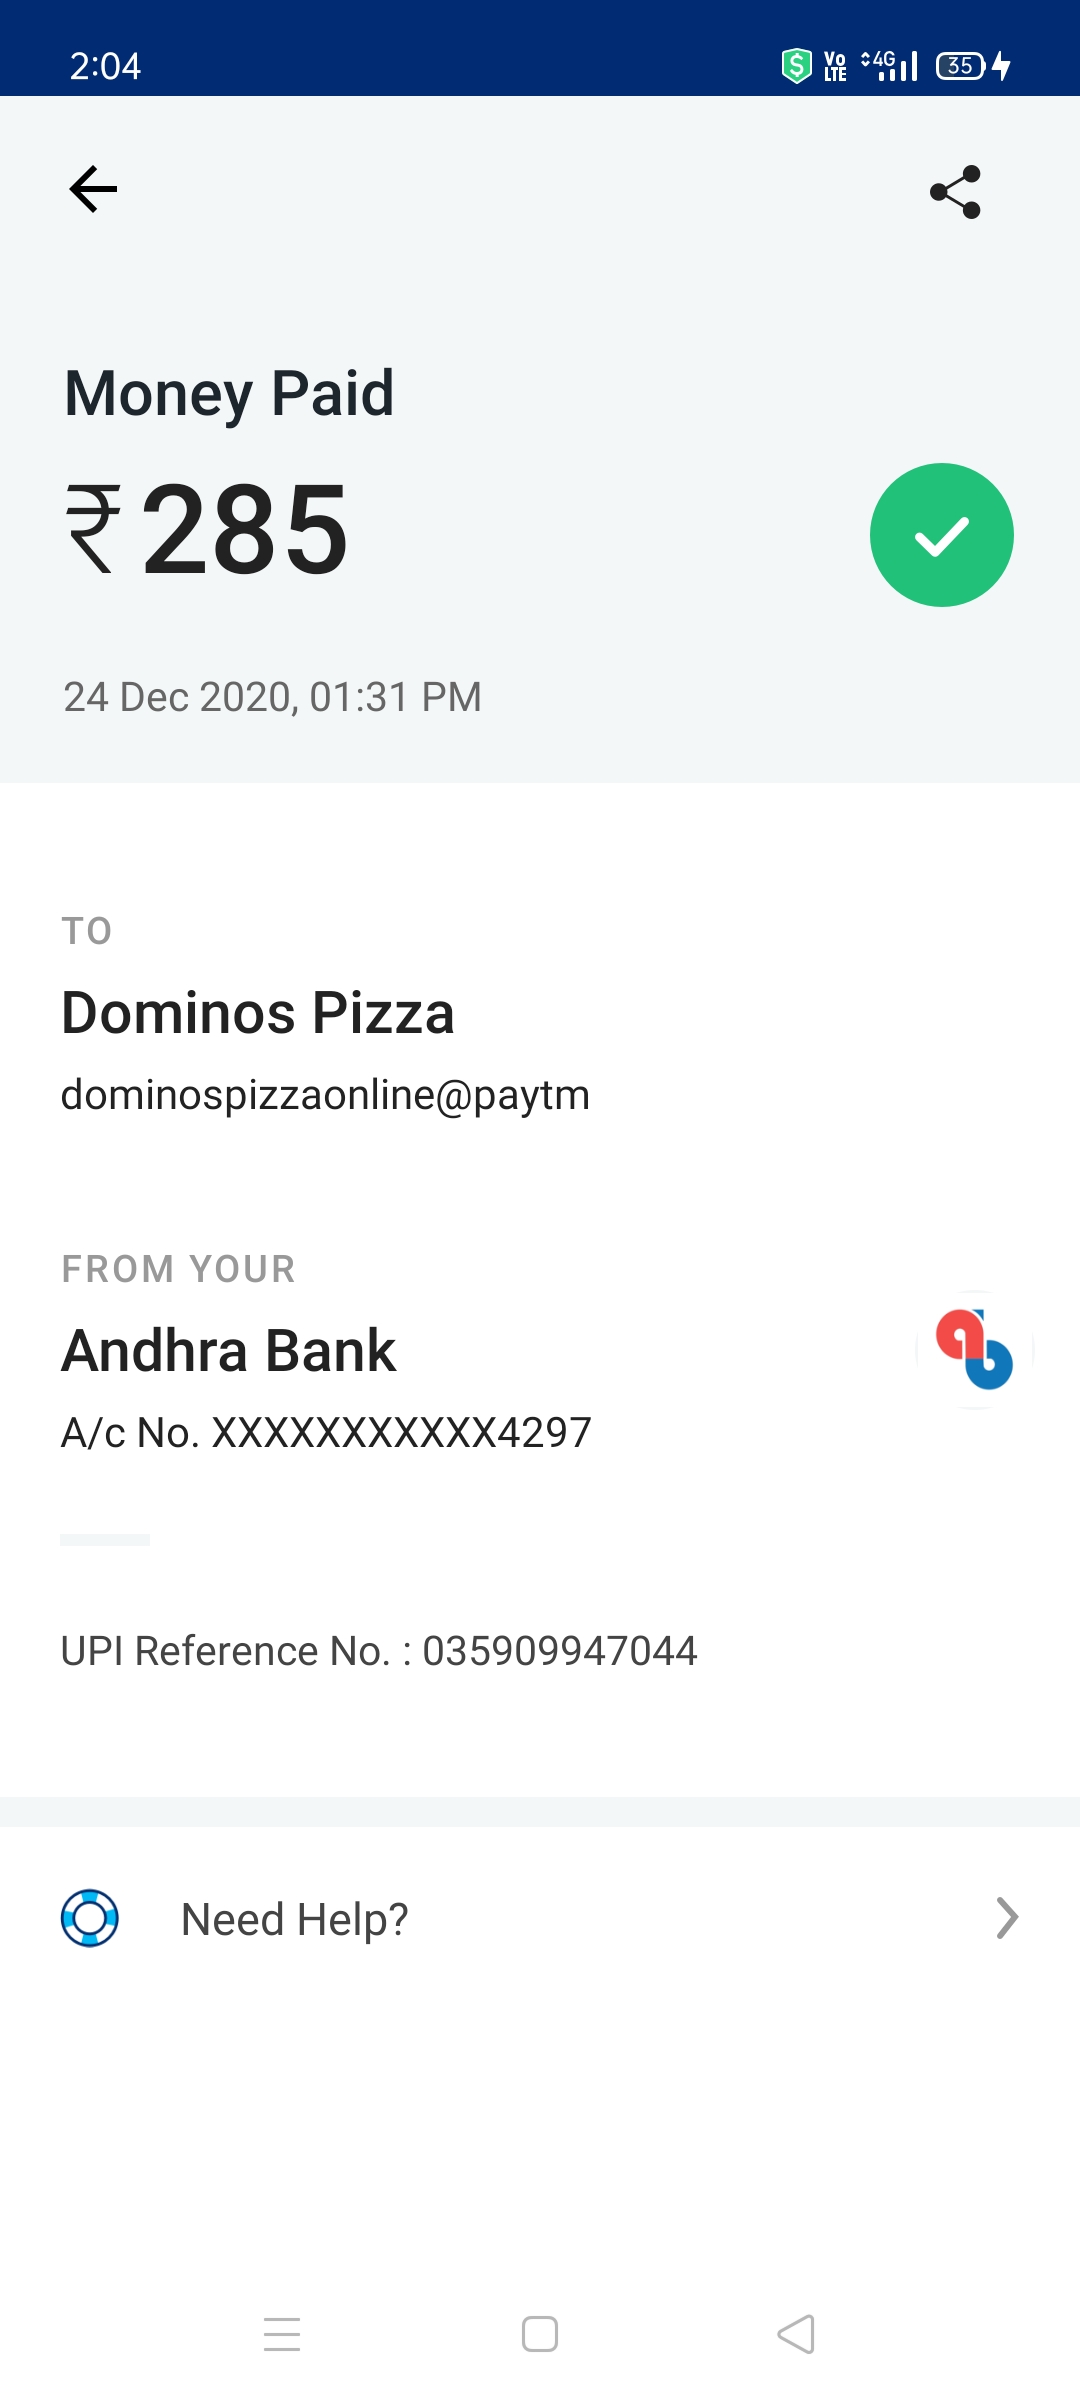 Dominos Pizza complaint Cancelled my order not returned money back